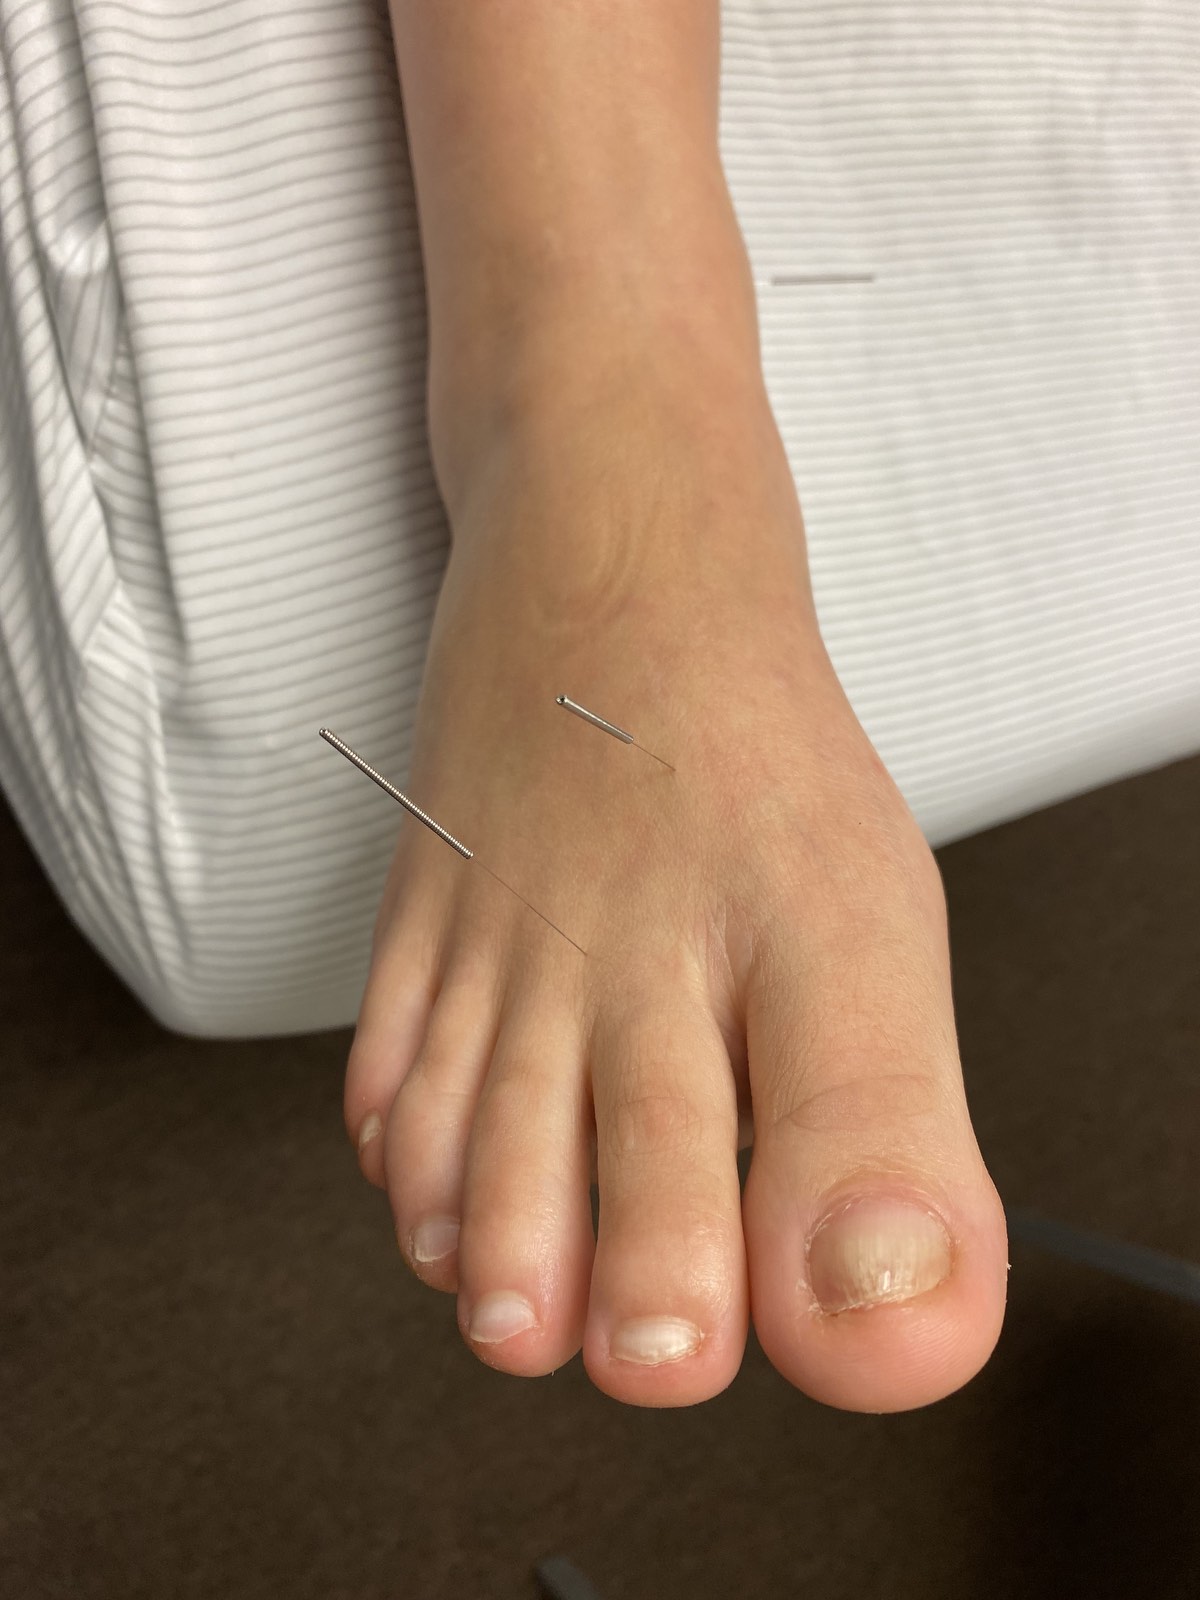 Acupuncture foot two